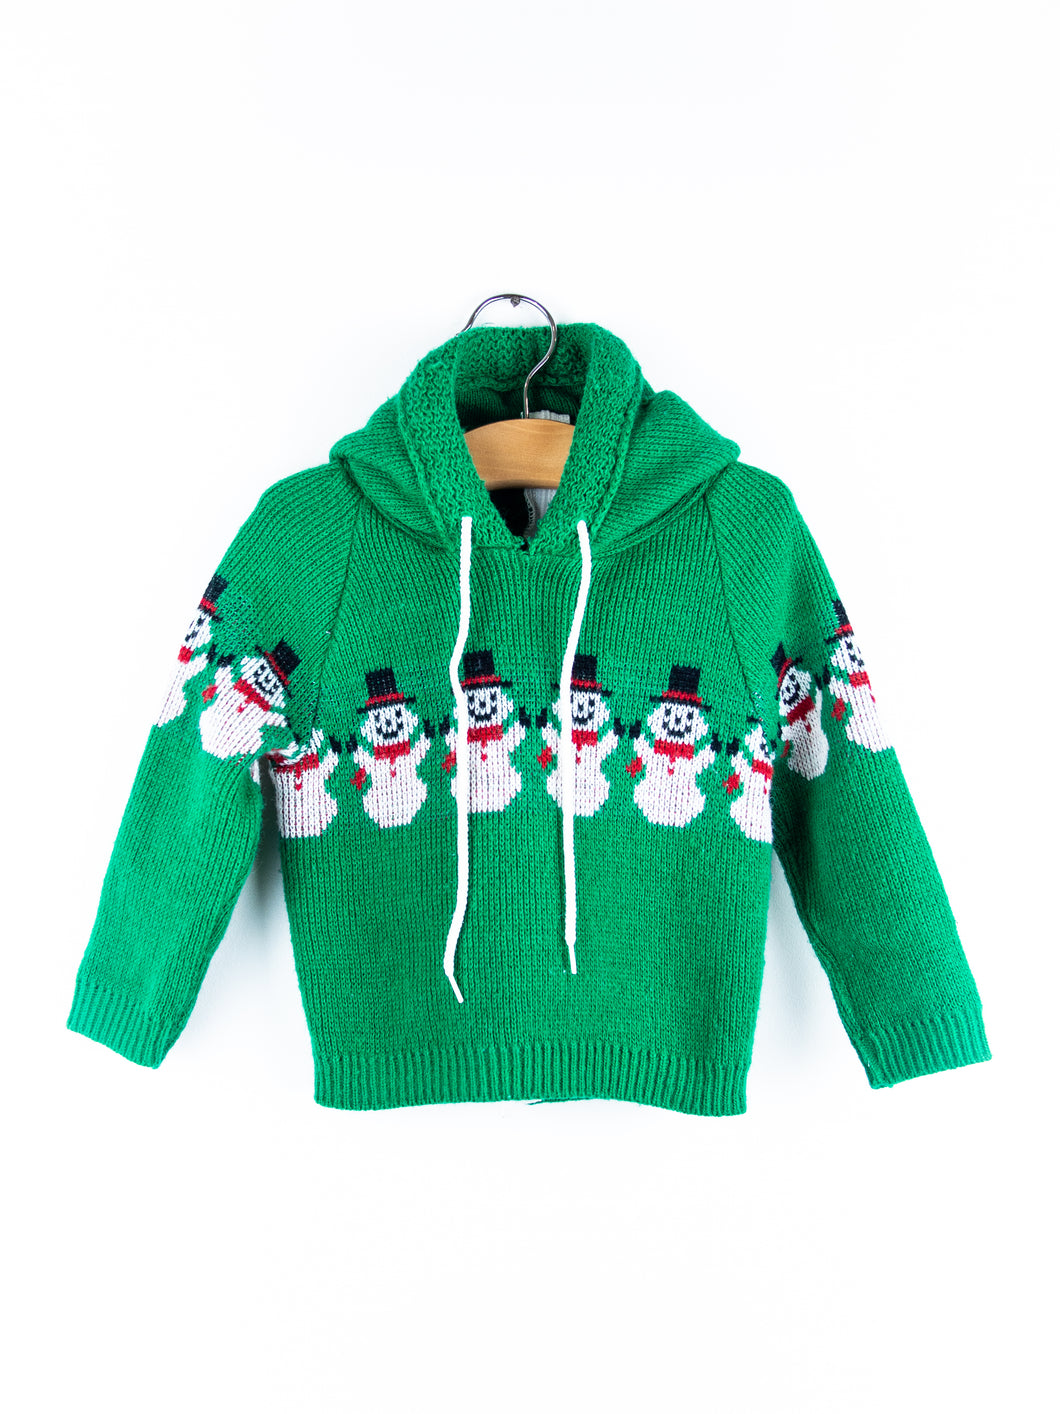 Vintage Snowman Knit Hoody - Age 6-9 months